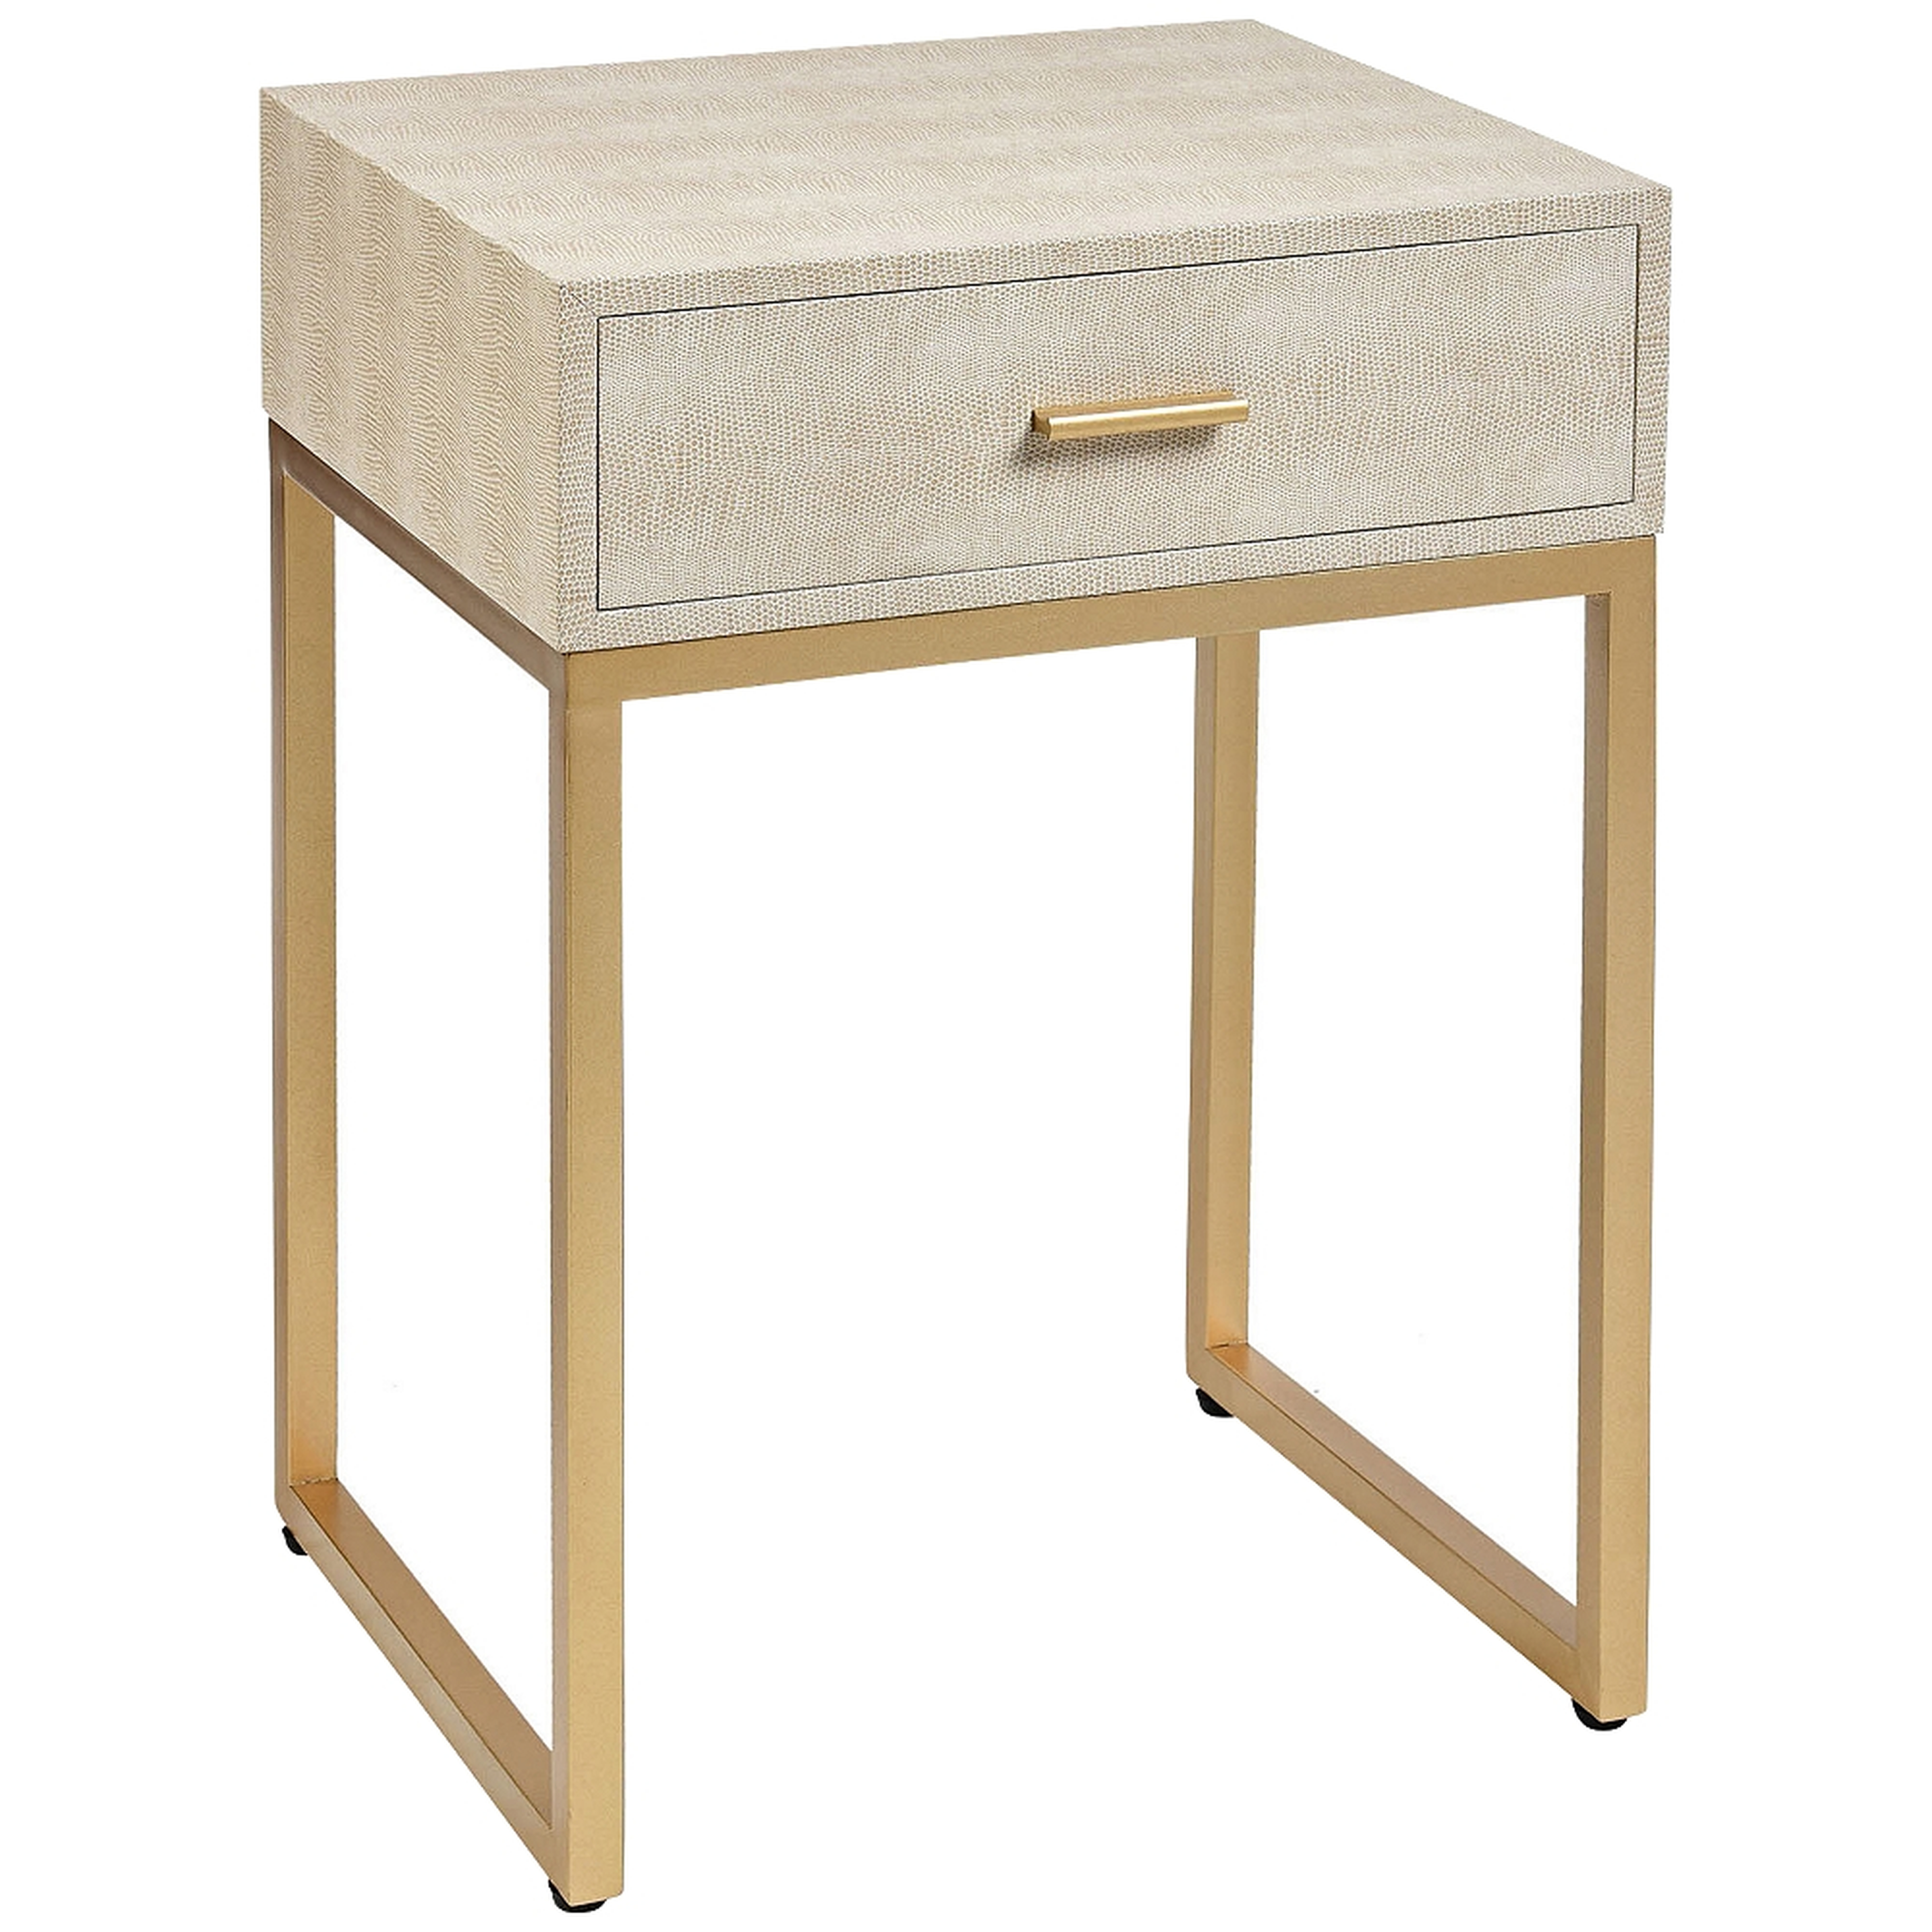 Les Revoires 16" Wide Cream and Gold 1-Drawer Accent Table - Style # 86A92 - Lamps Plus